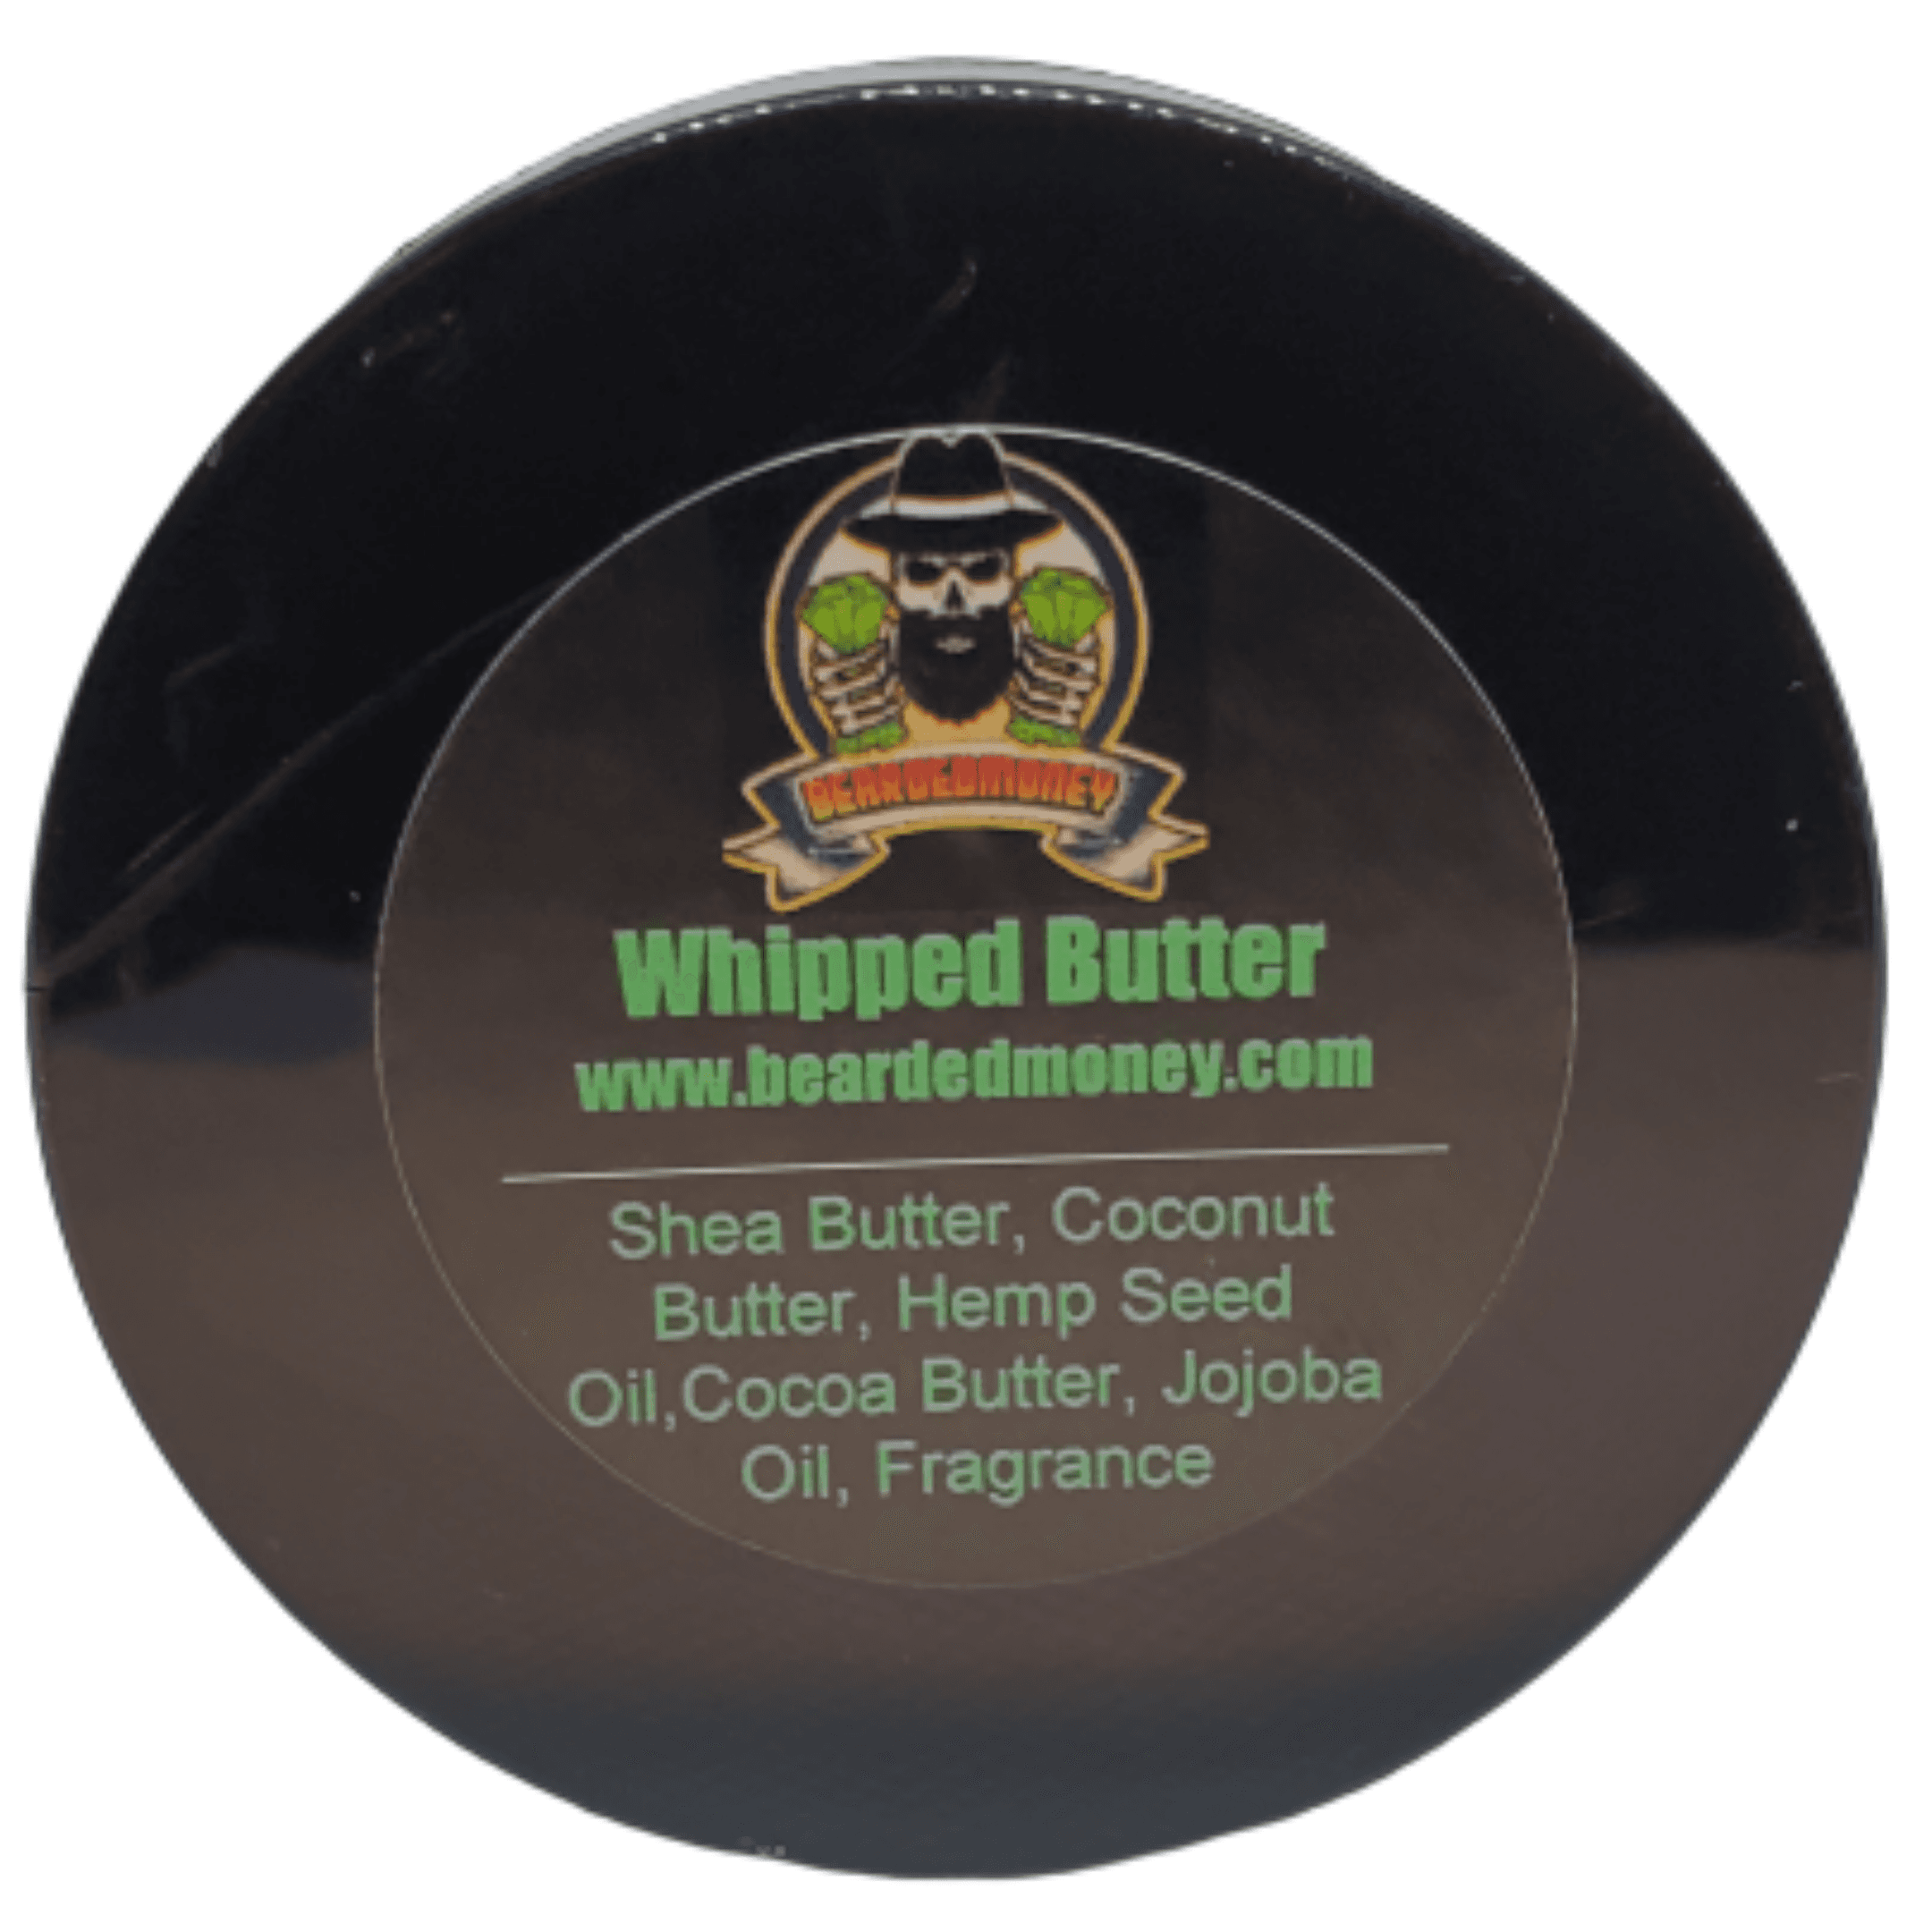 Whipped Loki Beard & Body Butter is a clean and crisp; Loki is sculpted with strong minty herbal notes, notes of lavender, and patchouli. Ultra fresh and masculine!.